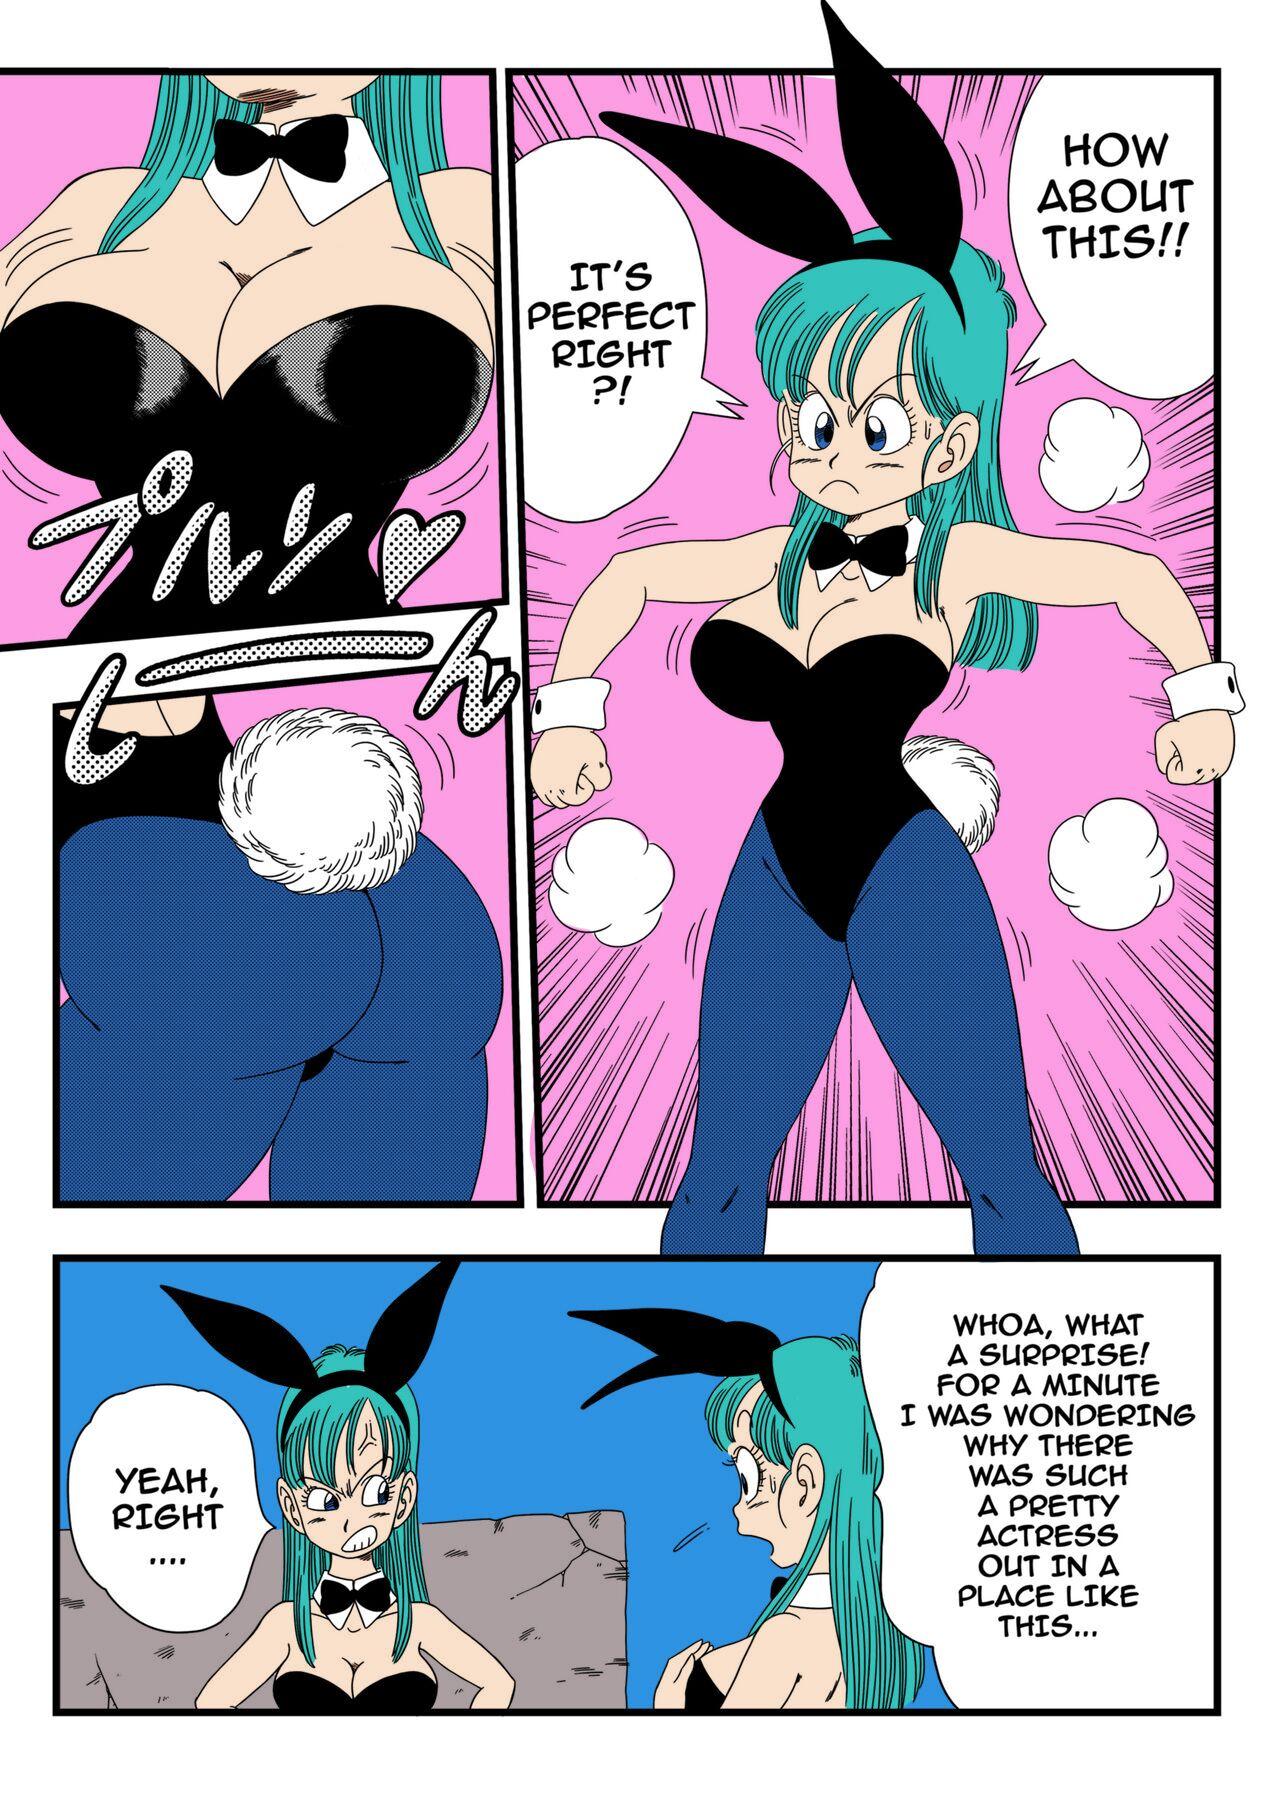 Young Bunny Girl Transformation Pussyeating - Page 5